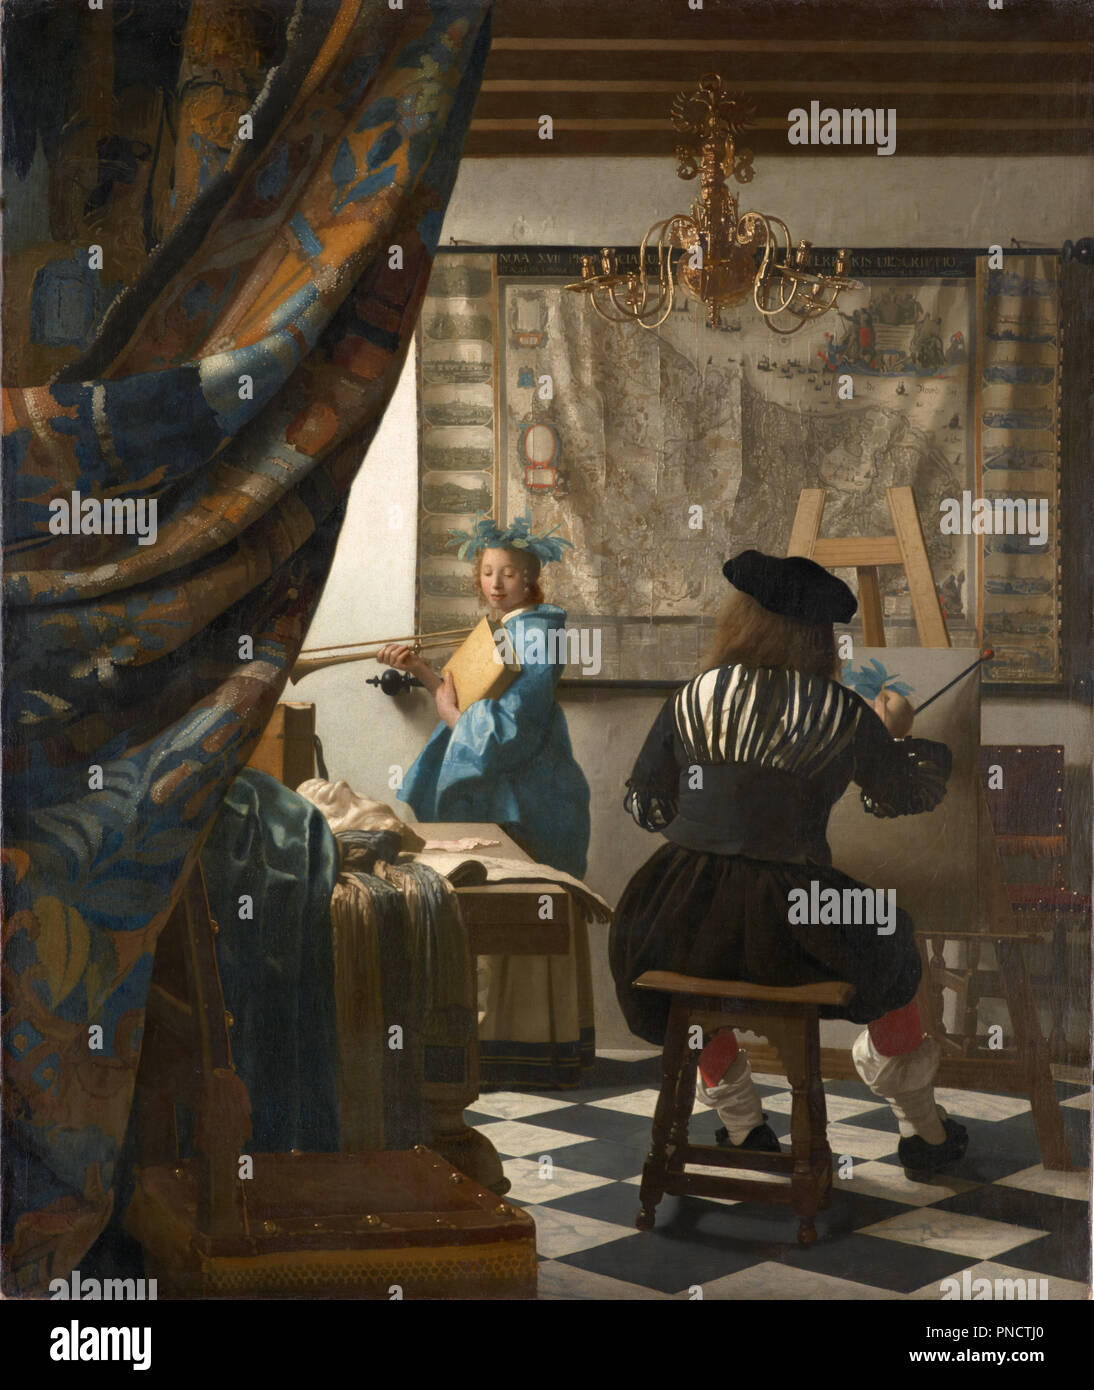 The Art of Painting. Date/Period: 1666 - 1668. Painting. Oil on canvas. Height: 1,200 mm (47.24 in); Width: 1,000 mm (39.37 in). Author: JOHANNES VERMEER. JAN VERMEER. VERMEER, JOHANNES. Vermeer, Jan (Johannes). Stock Photo